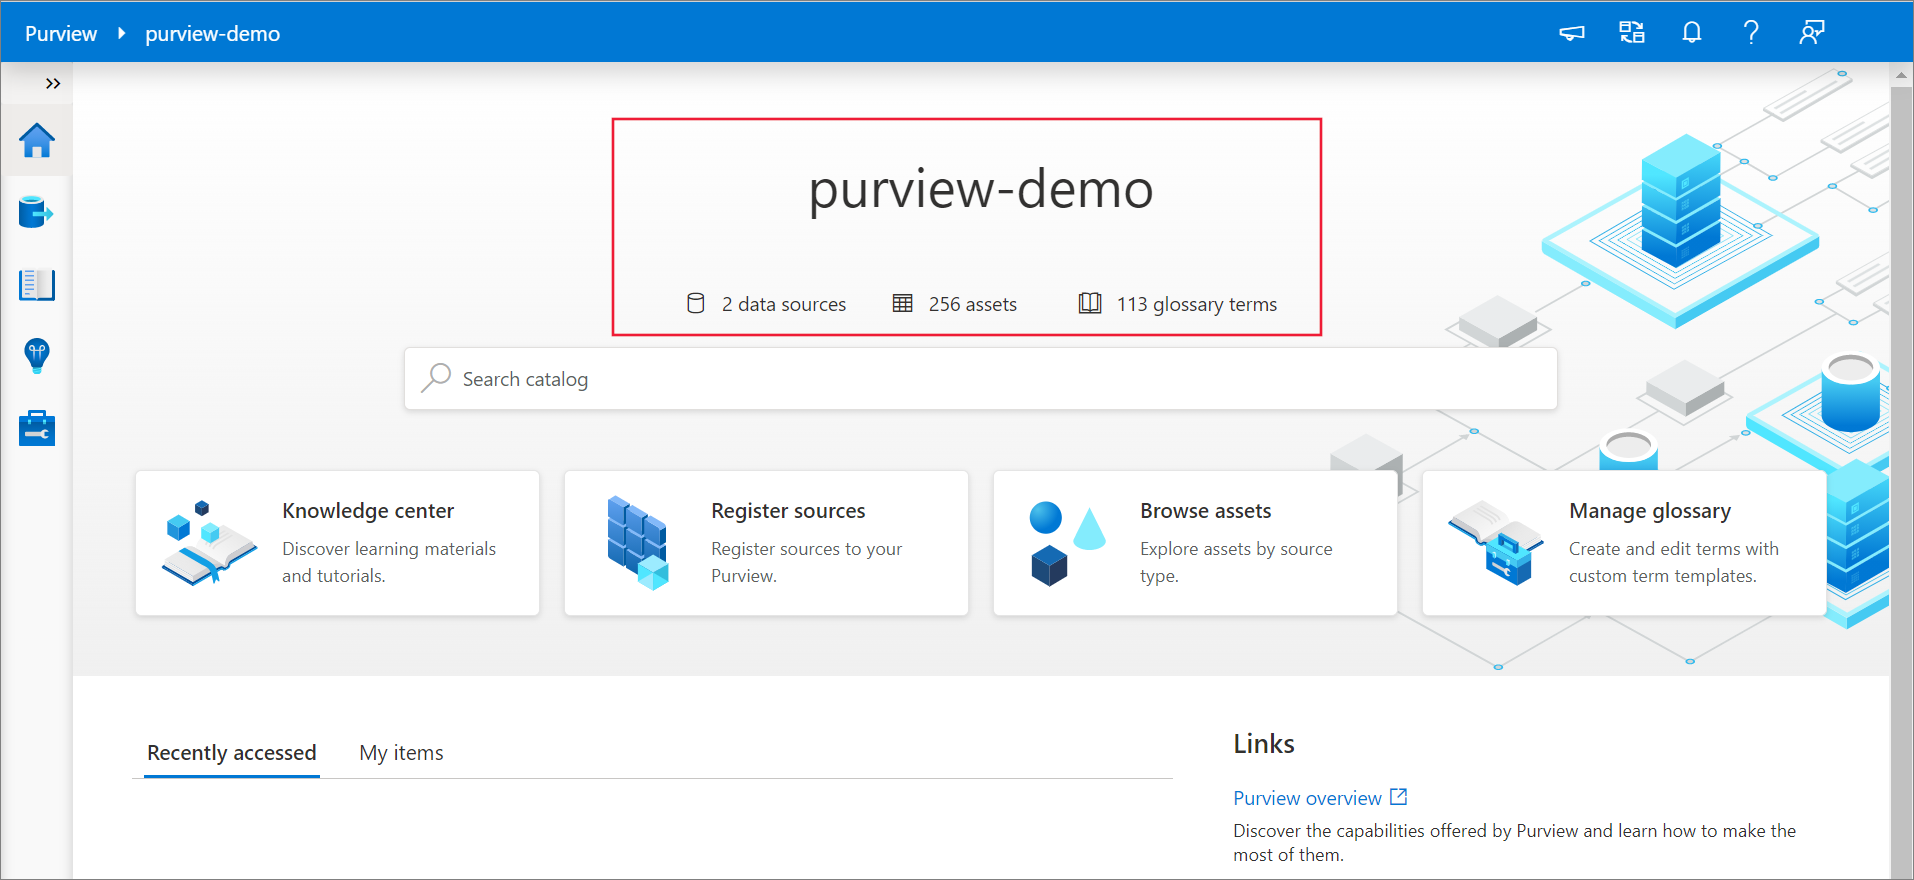 Azure Purview in action